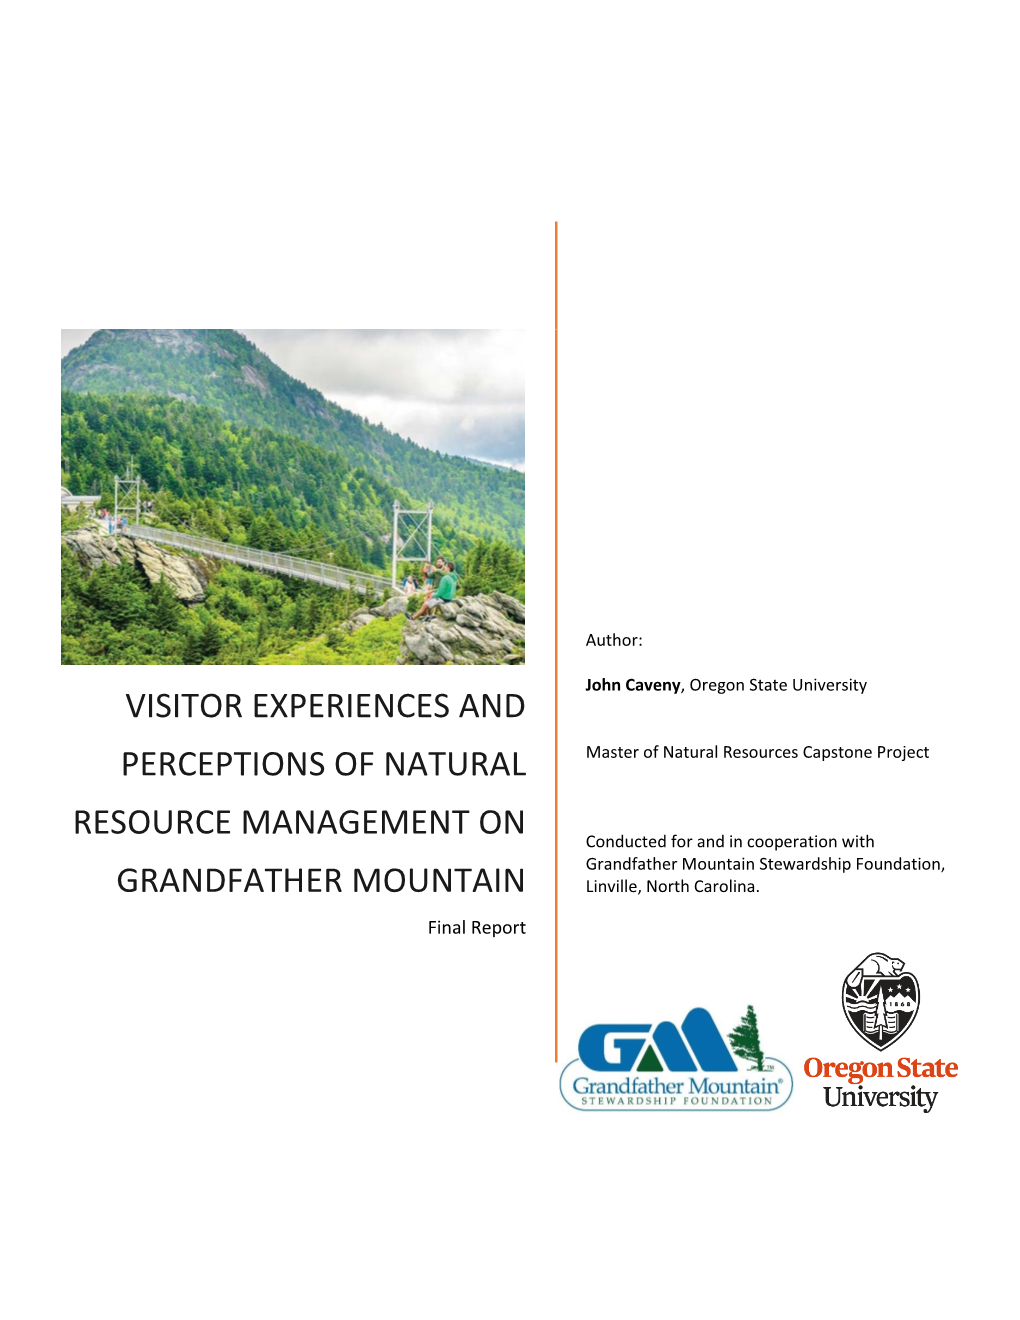 VISITOR Experiences and PERCEPTIONS of NATURAL RESOURCE MANAGEMENT on GRANDFATHER MOUNTAIN